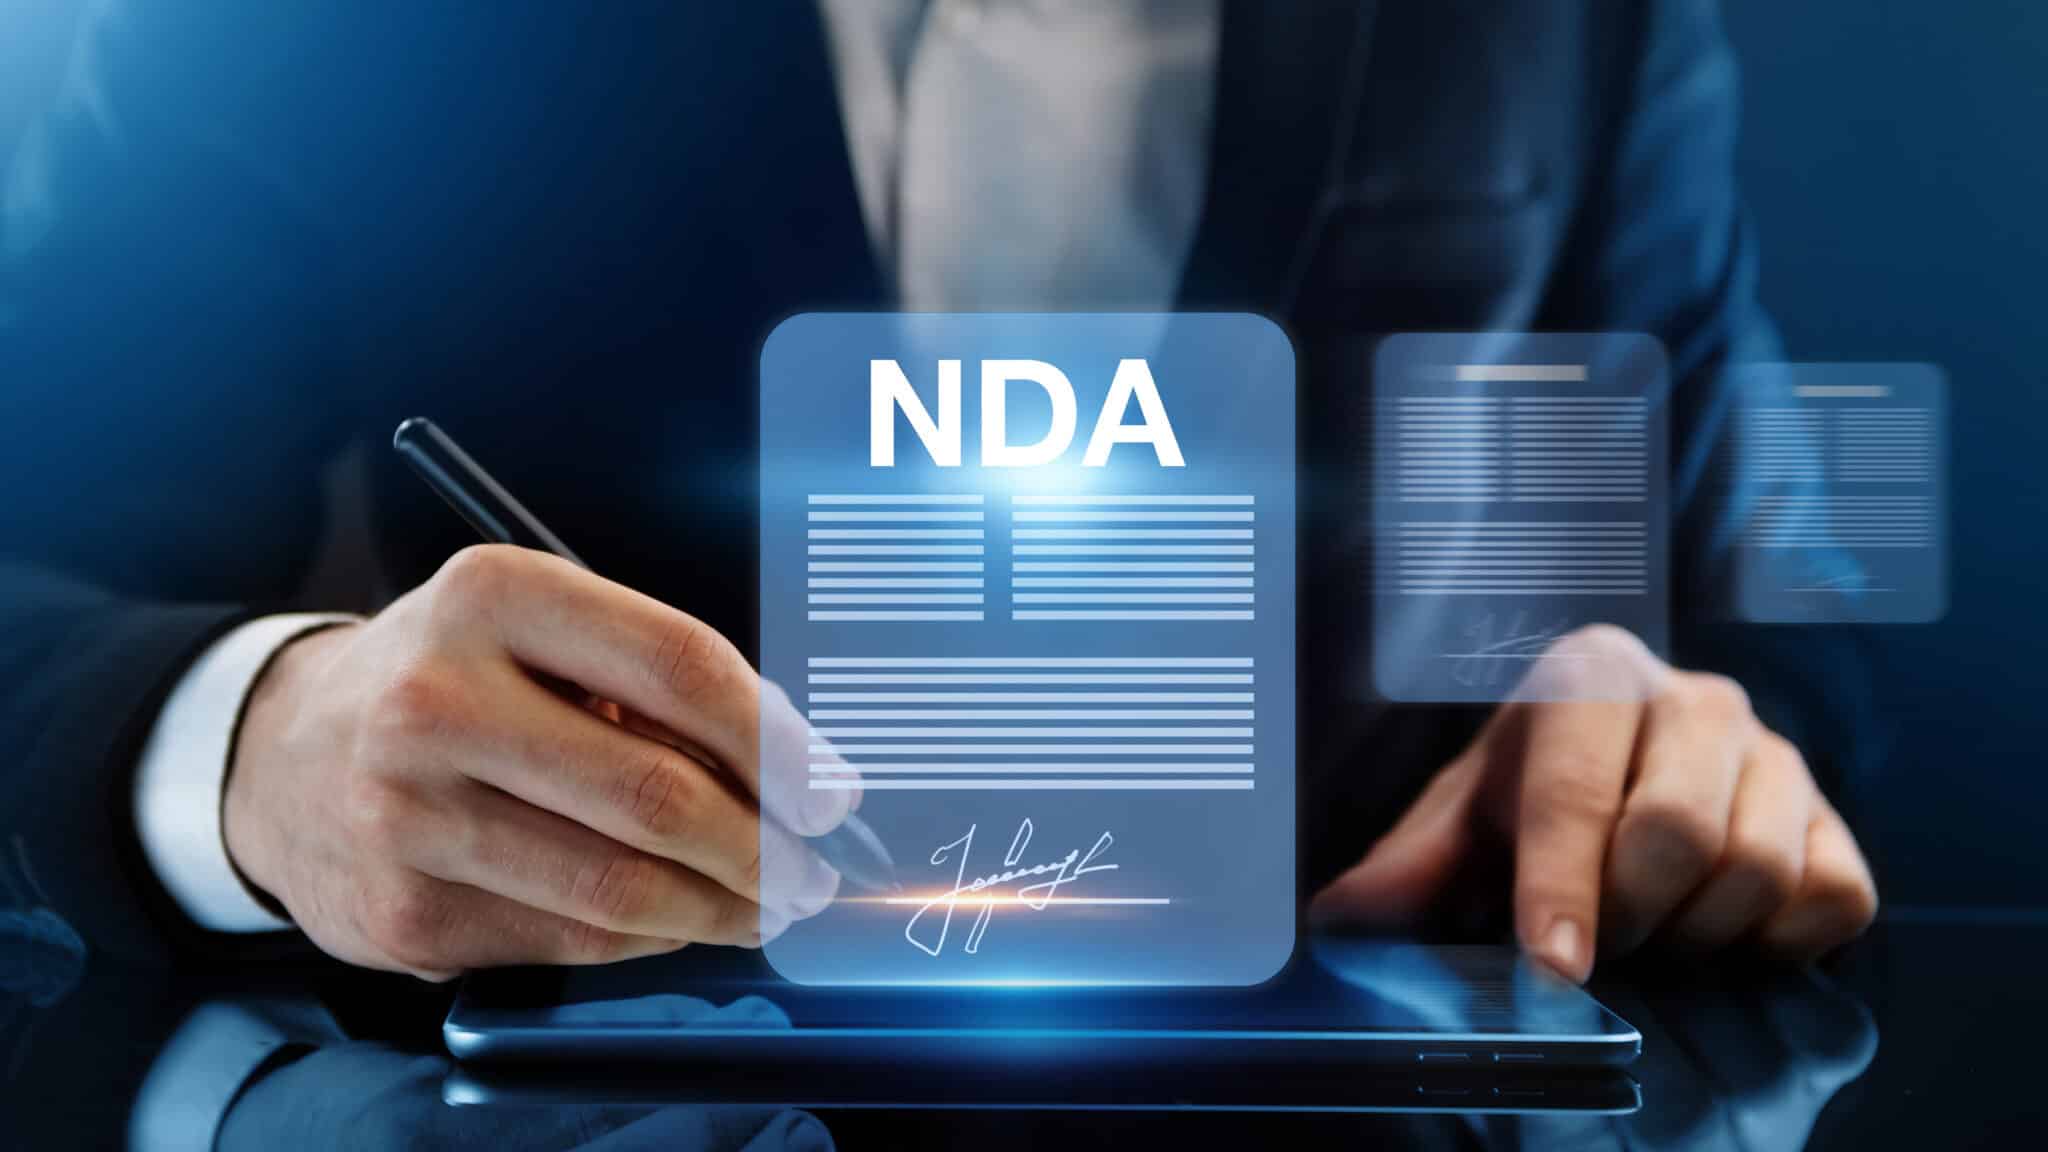 Signing NDA: Athreon's pledge for secure and confidential transcription outsourcing services.